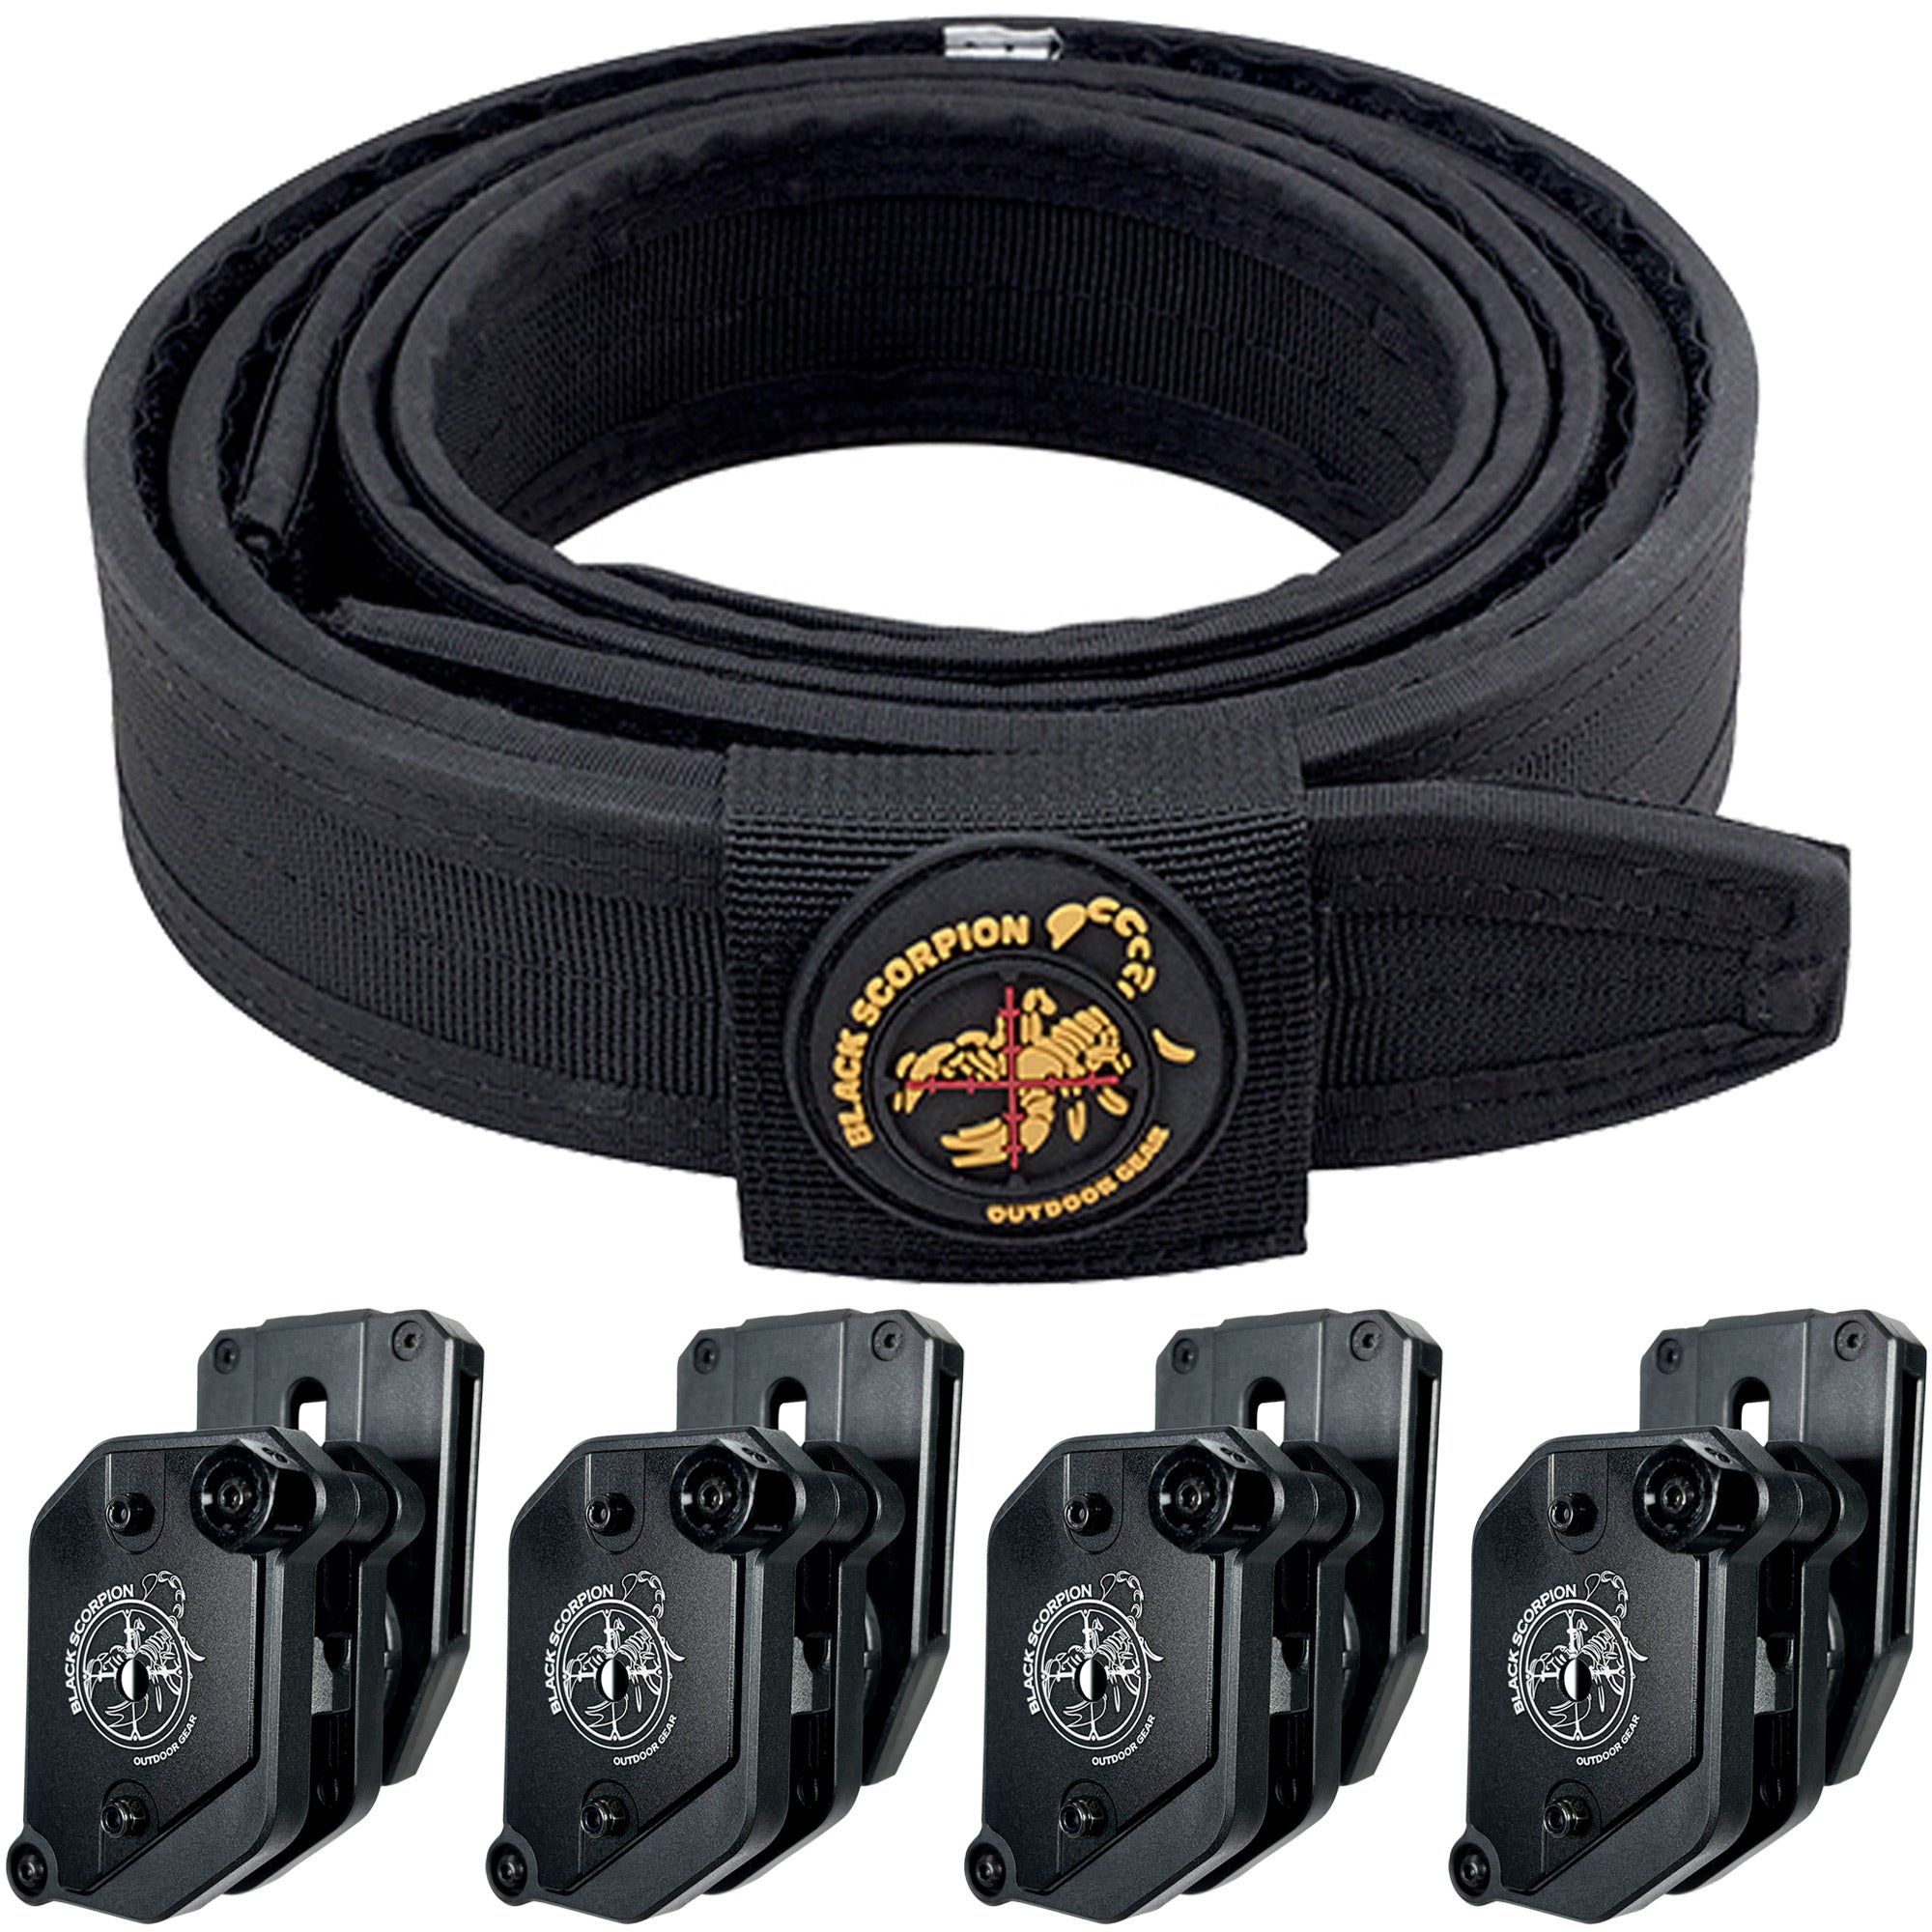 Competition Rig - 1 Heavy Duty Belt w/ 4 Ambidextrous Single/Double Stack Magazine Pouches